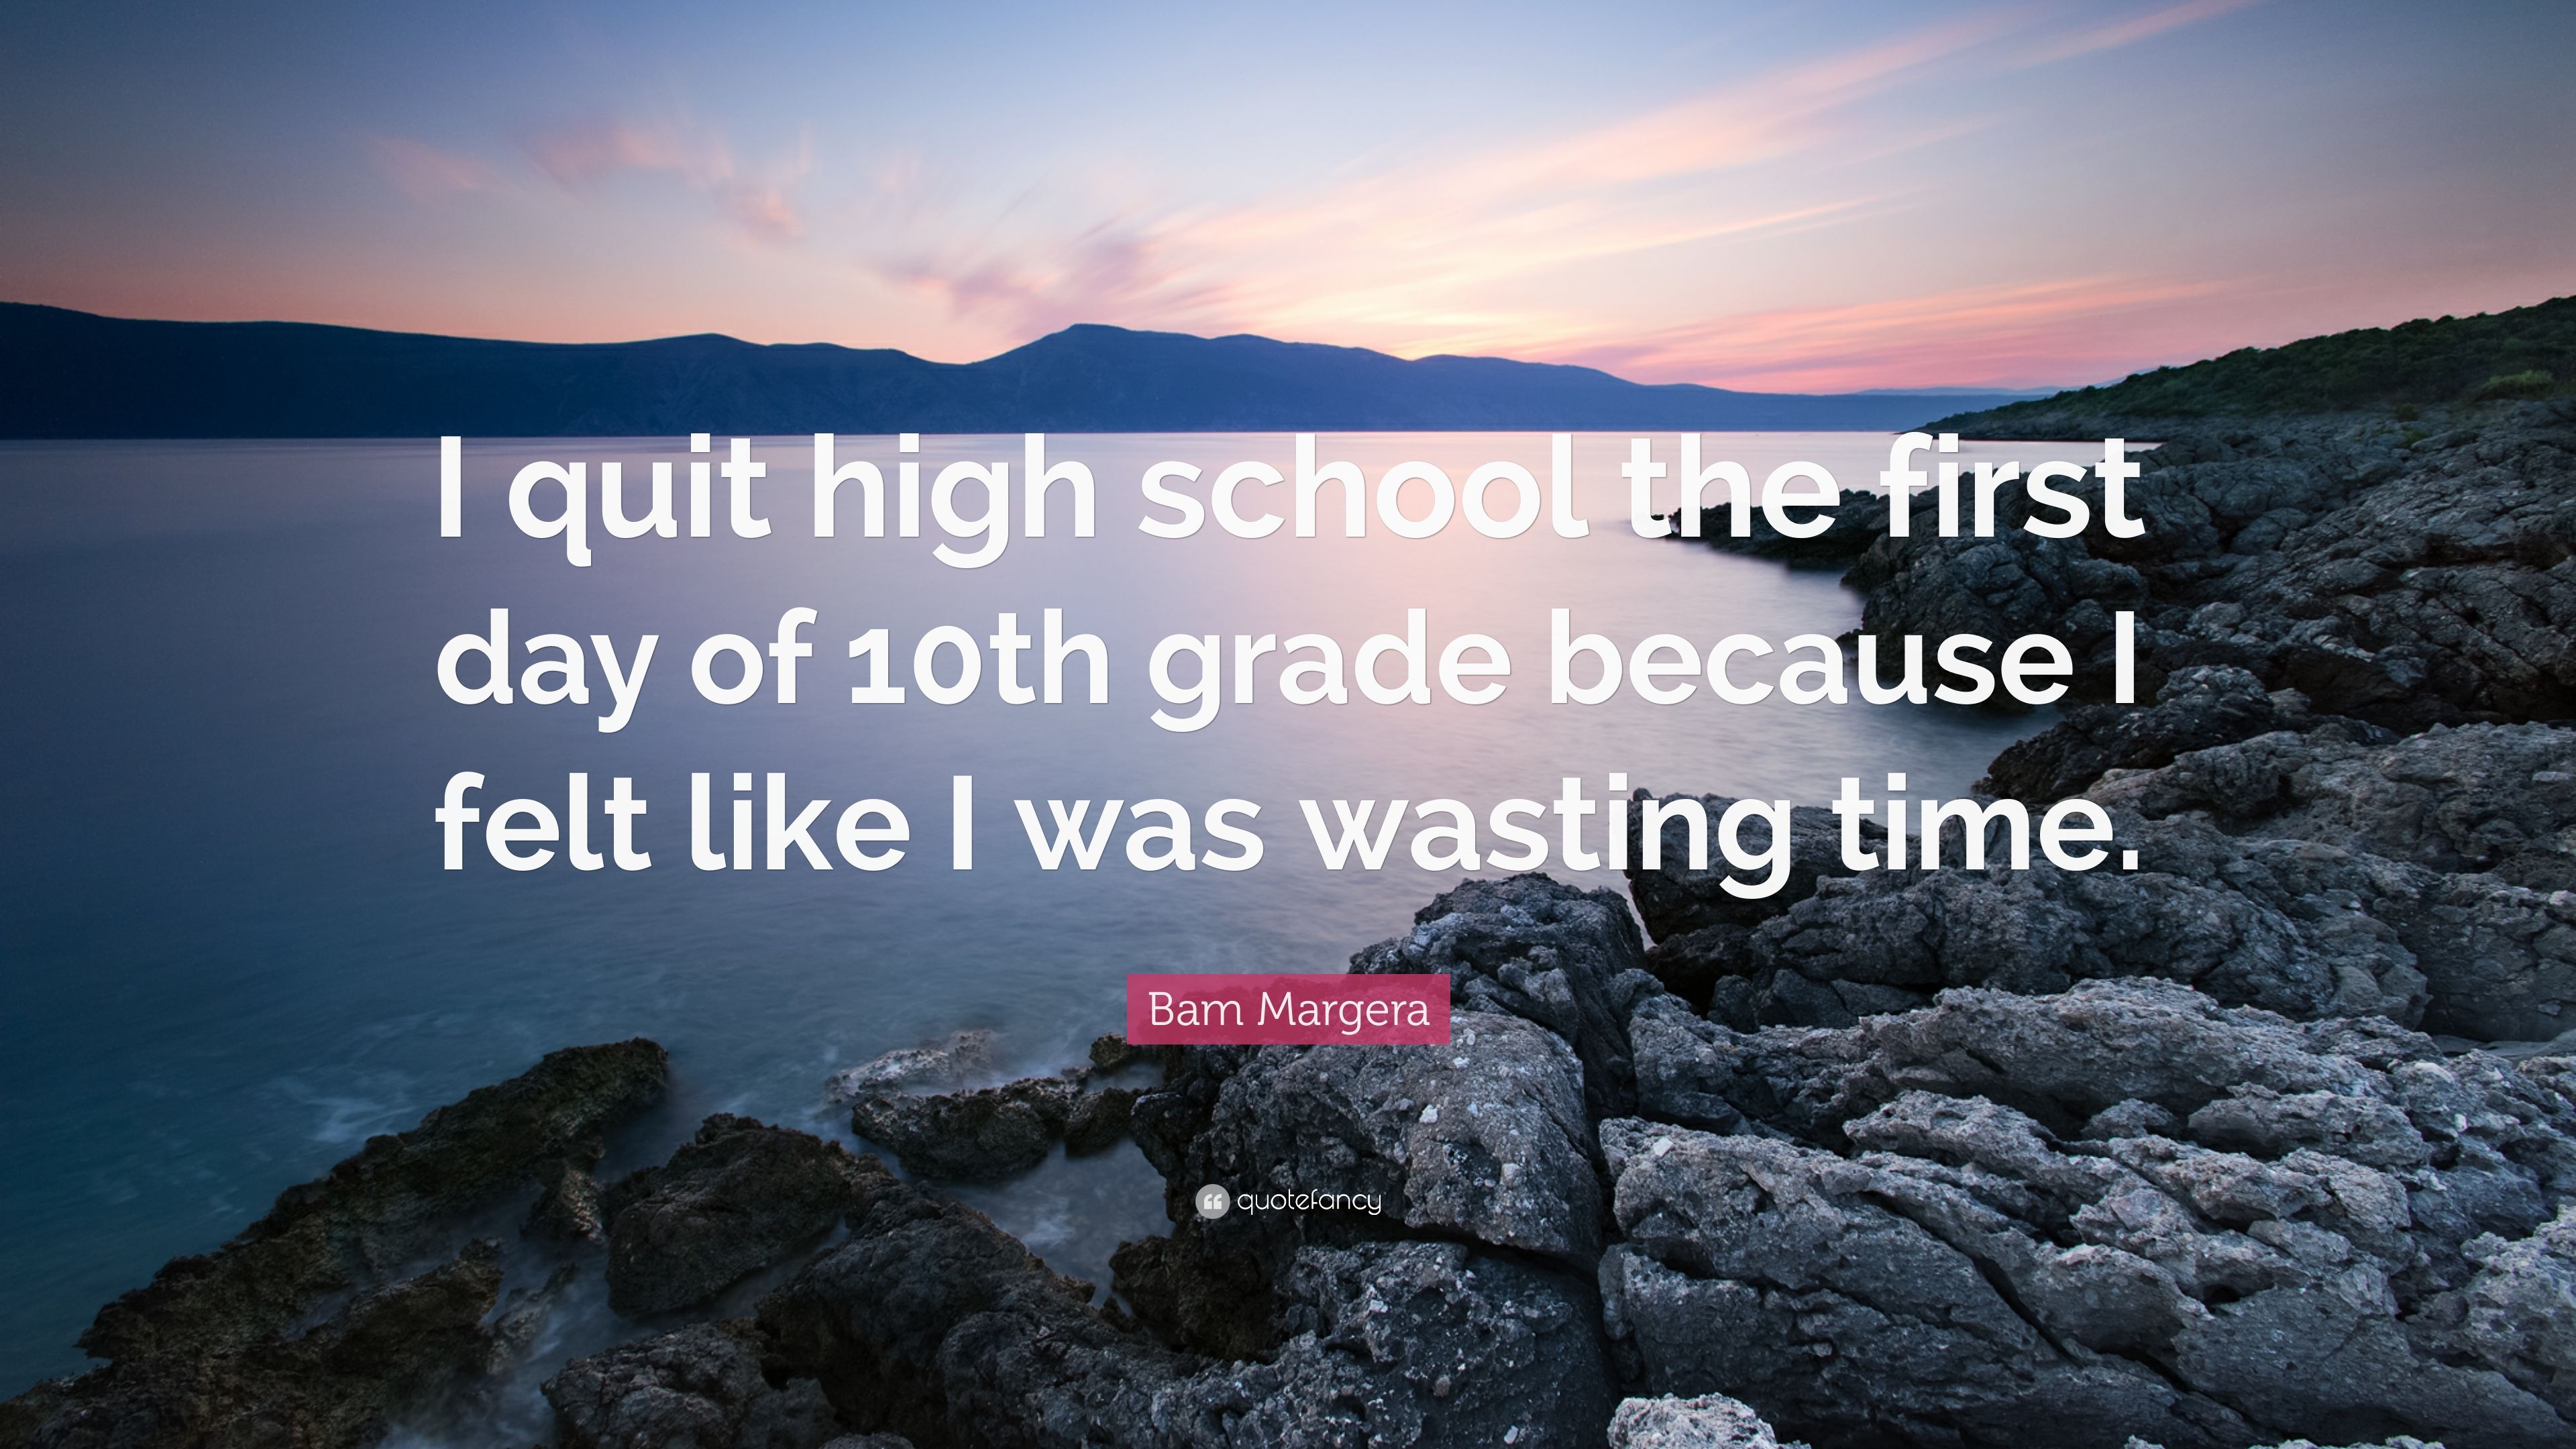 Bam Margera Quote: “I quit high school the first day of 10th grade